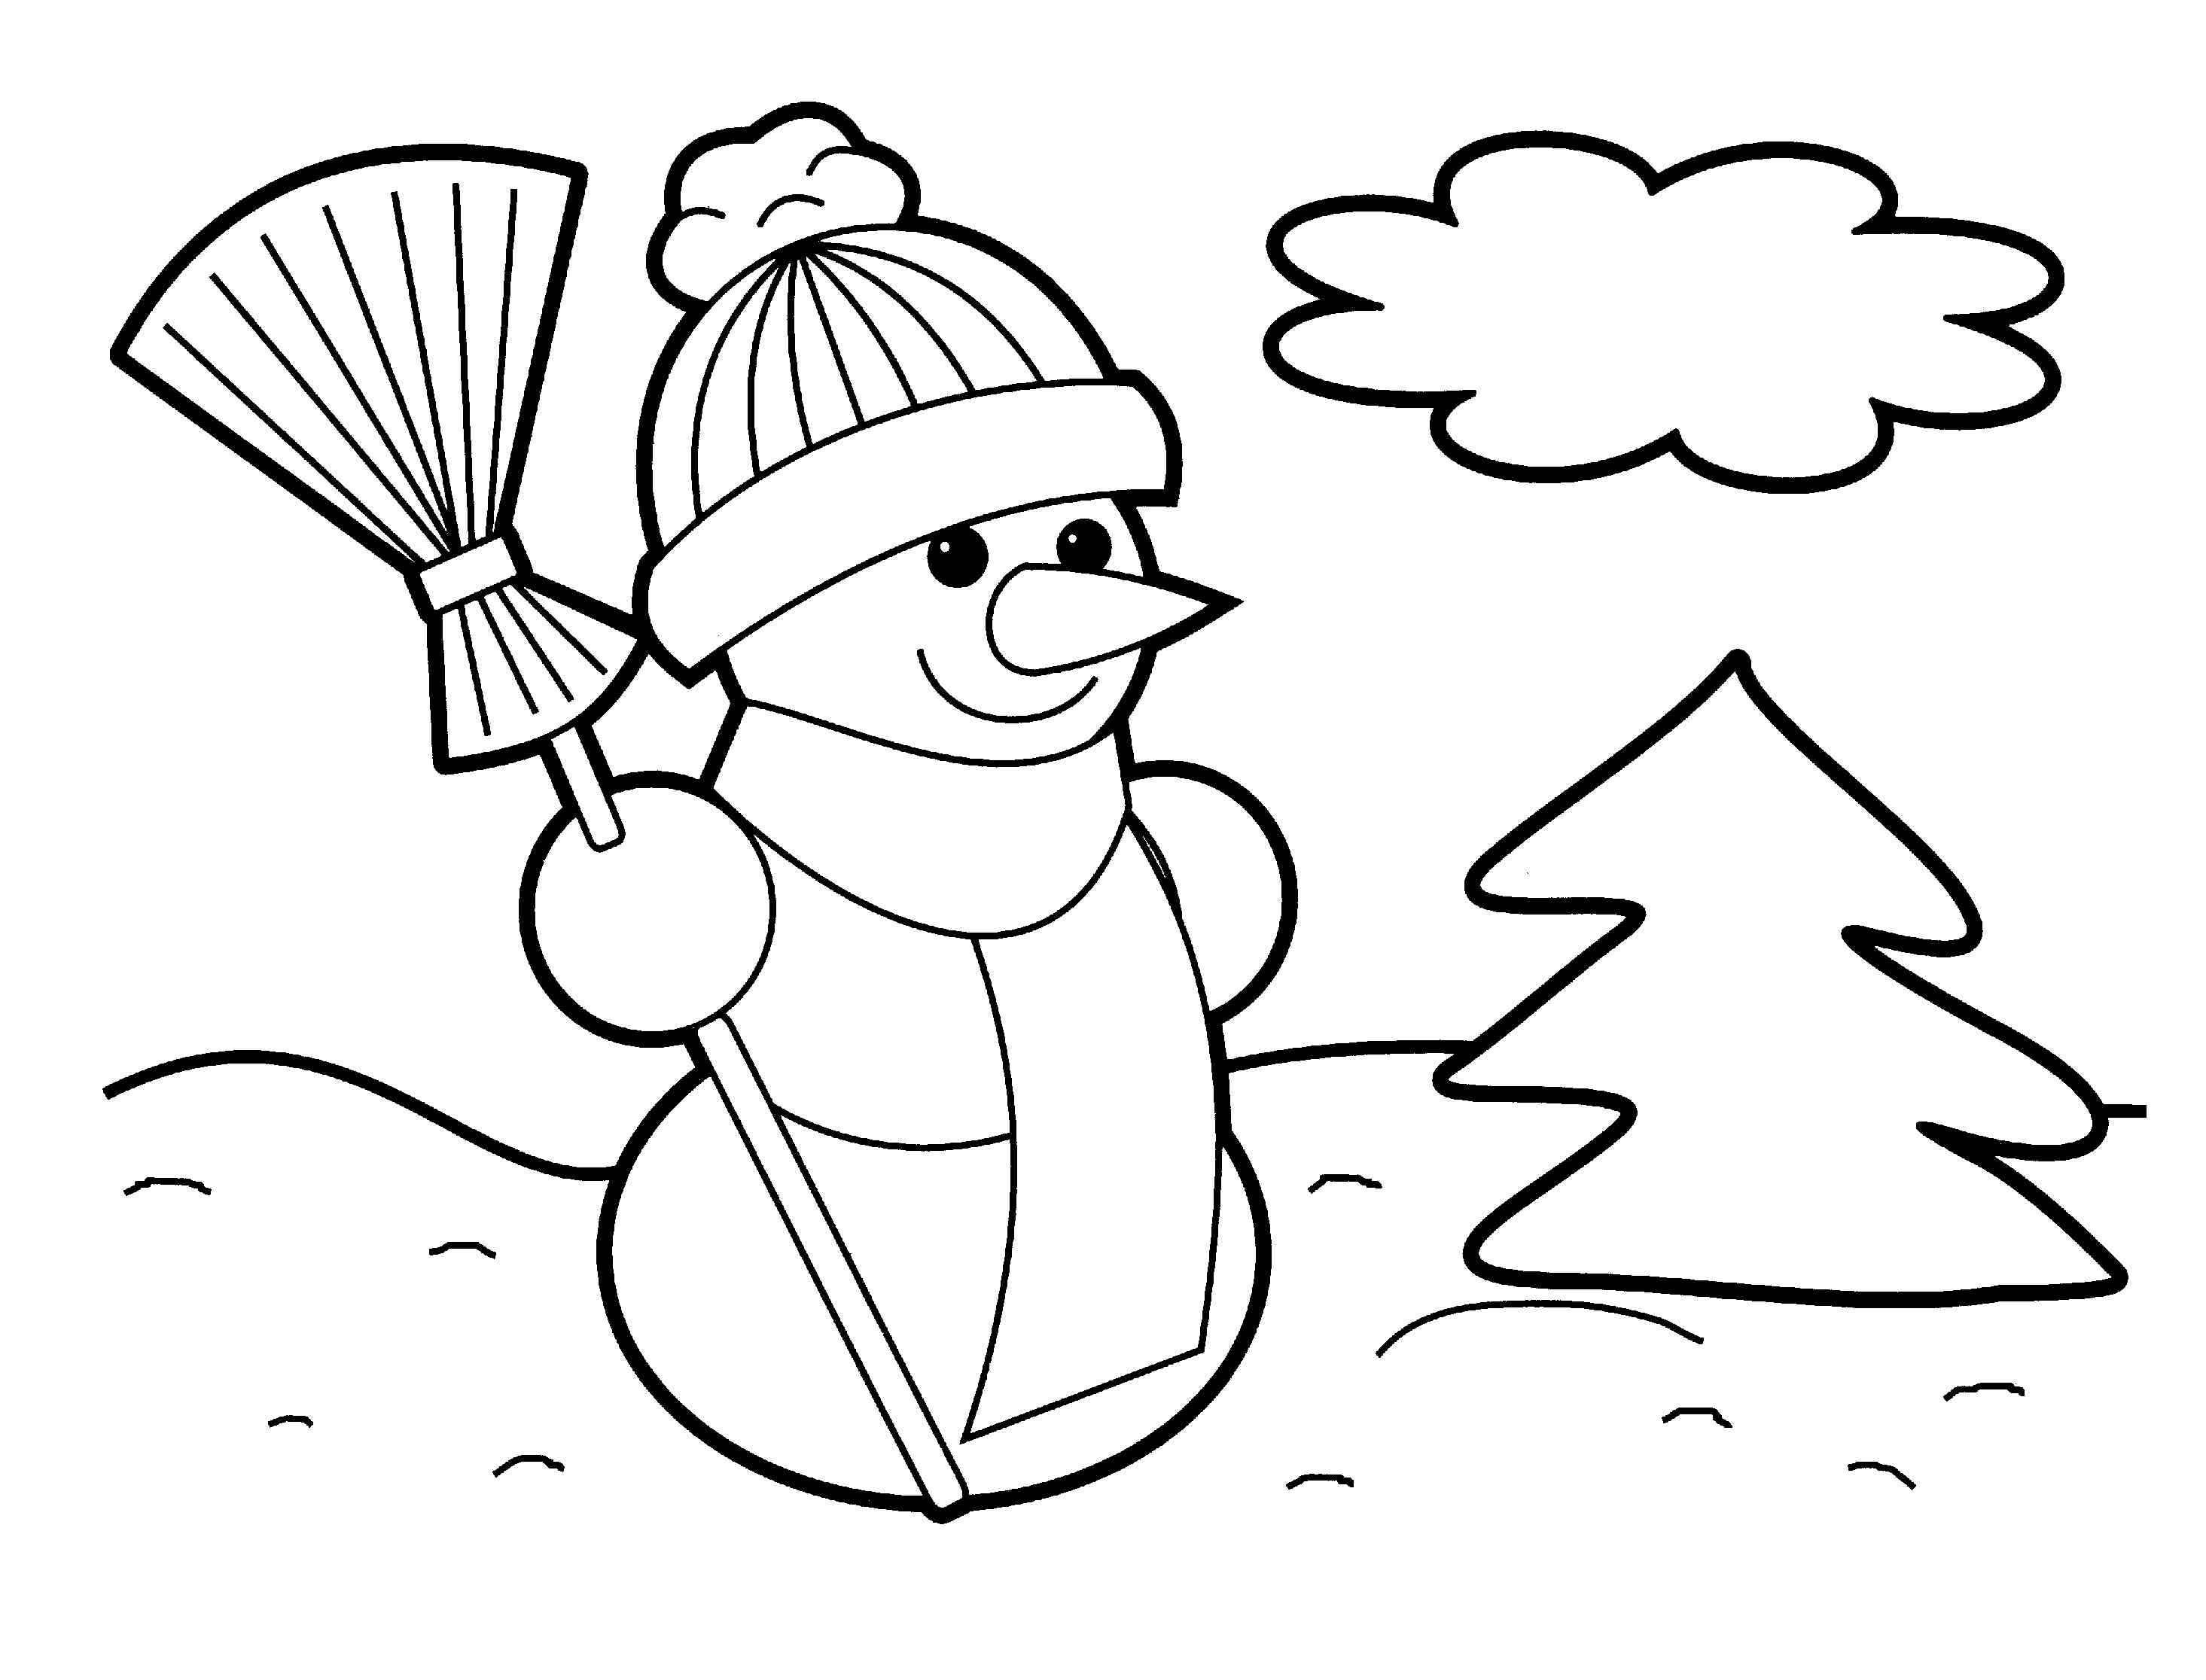 Lego Christmas Coloring Pages at GetColorings.com | Free ...